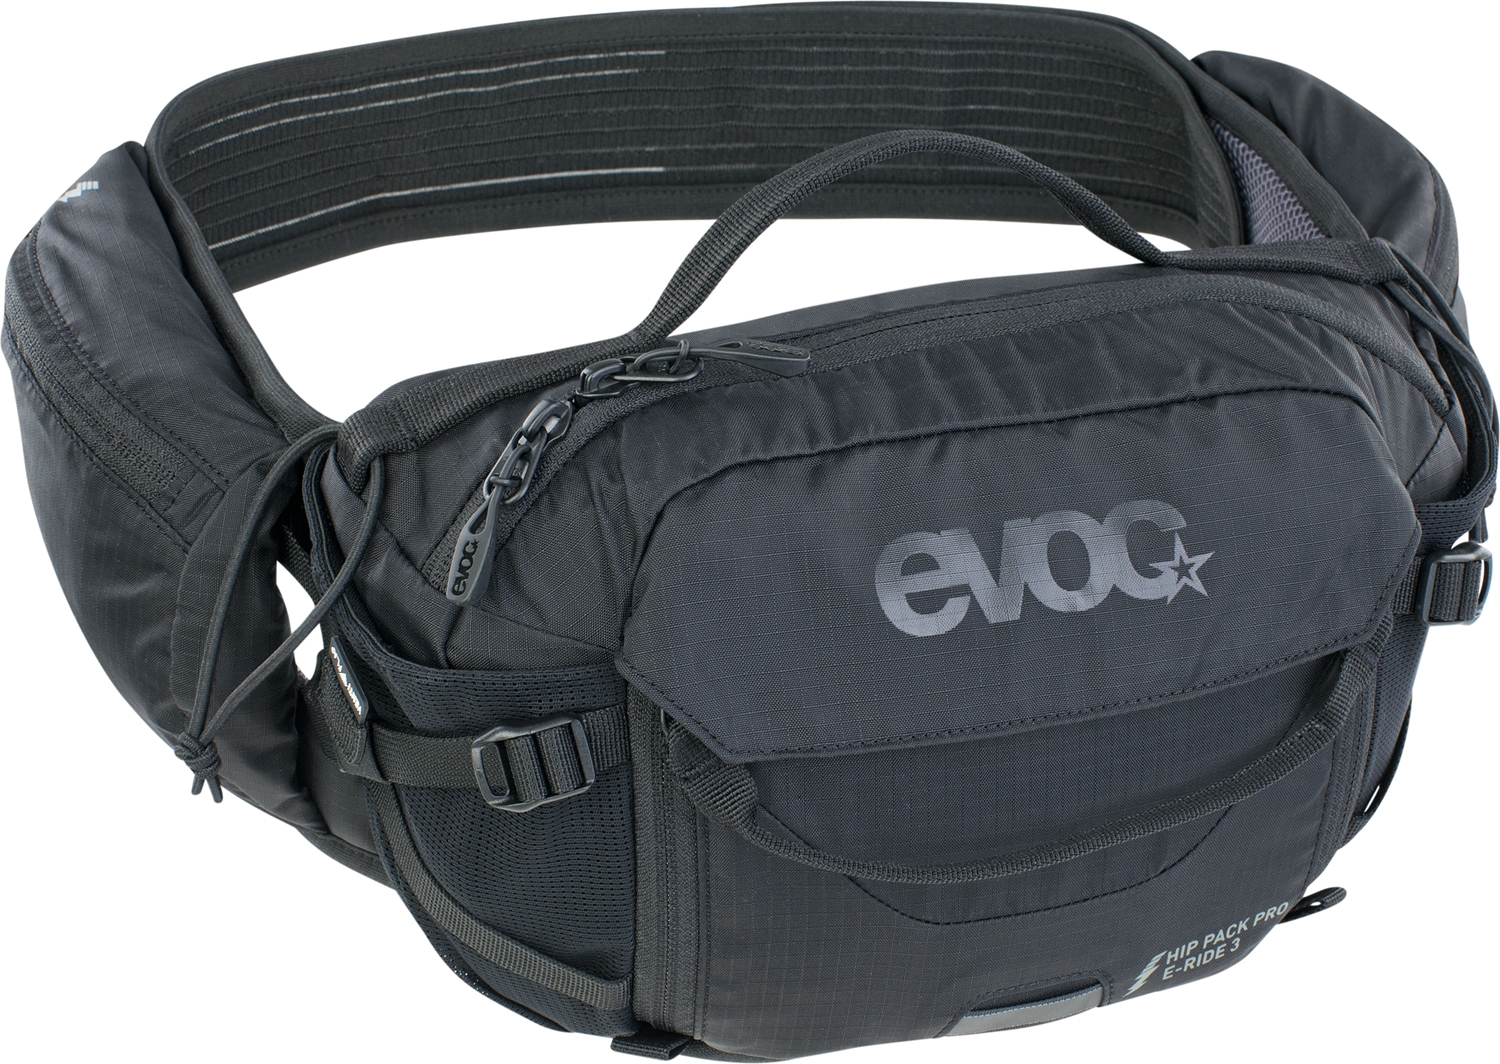 Hip Pack Pro E-Ride 3 